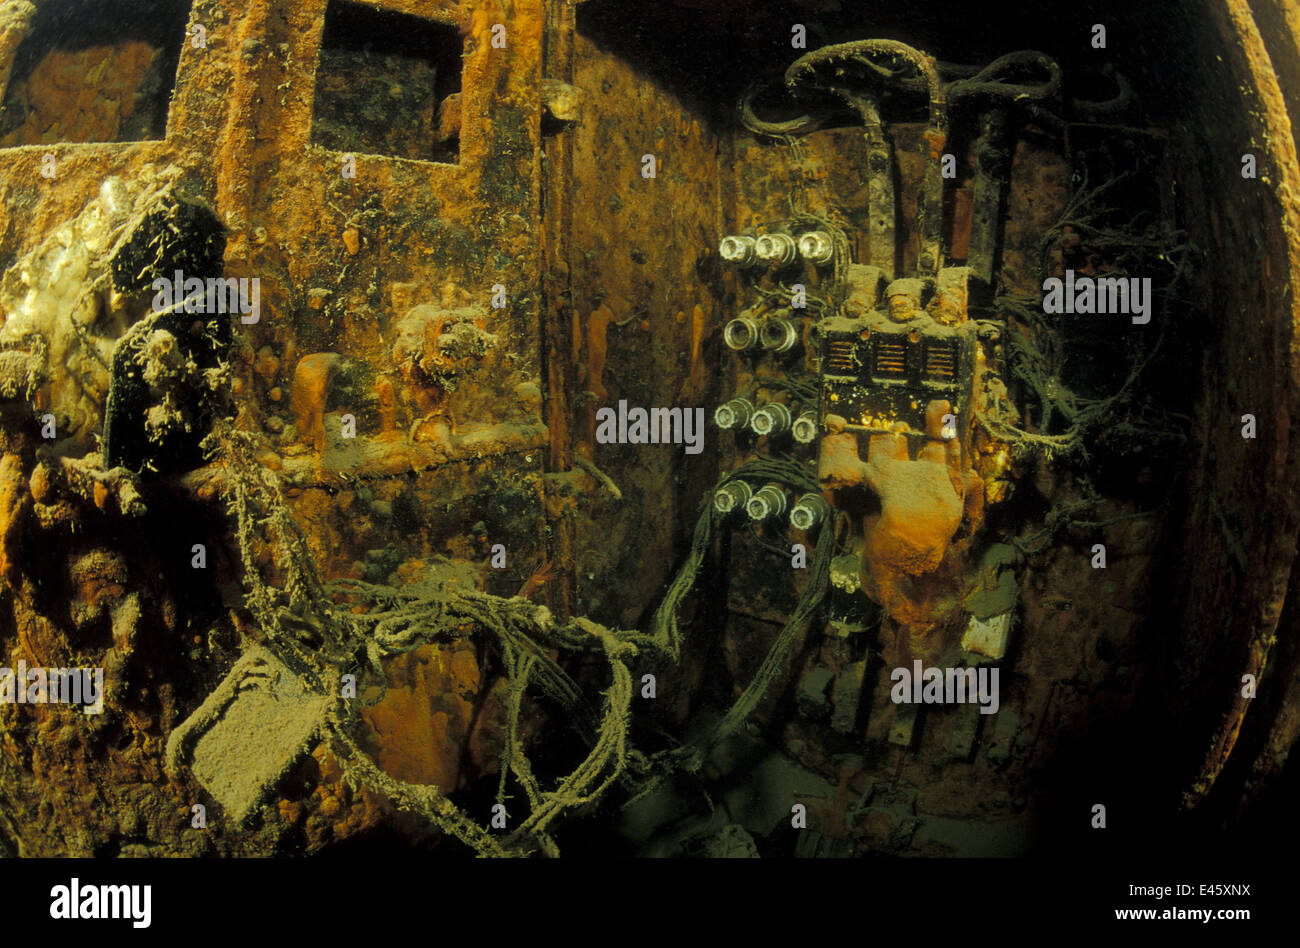 Electricity system in engine room of wrecked crude oil super-tanker 'Amoco Milford Haven', which sank on April 14th, 1991 after three days of fire. Genoa, Italy, 2002. Stock Photo